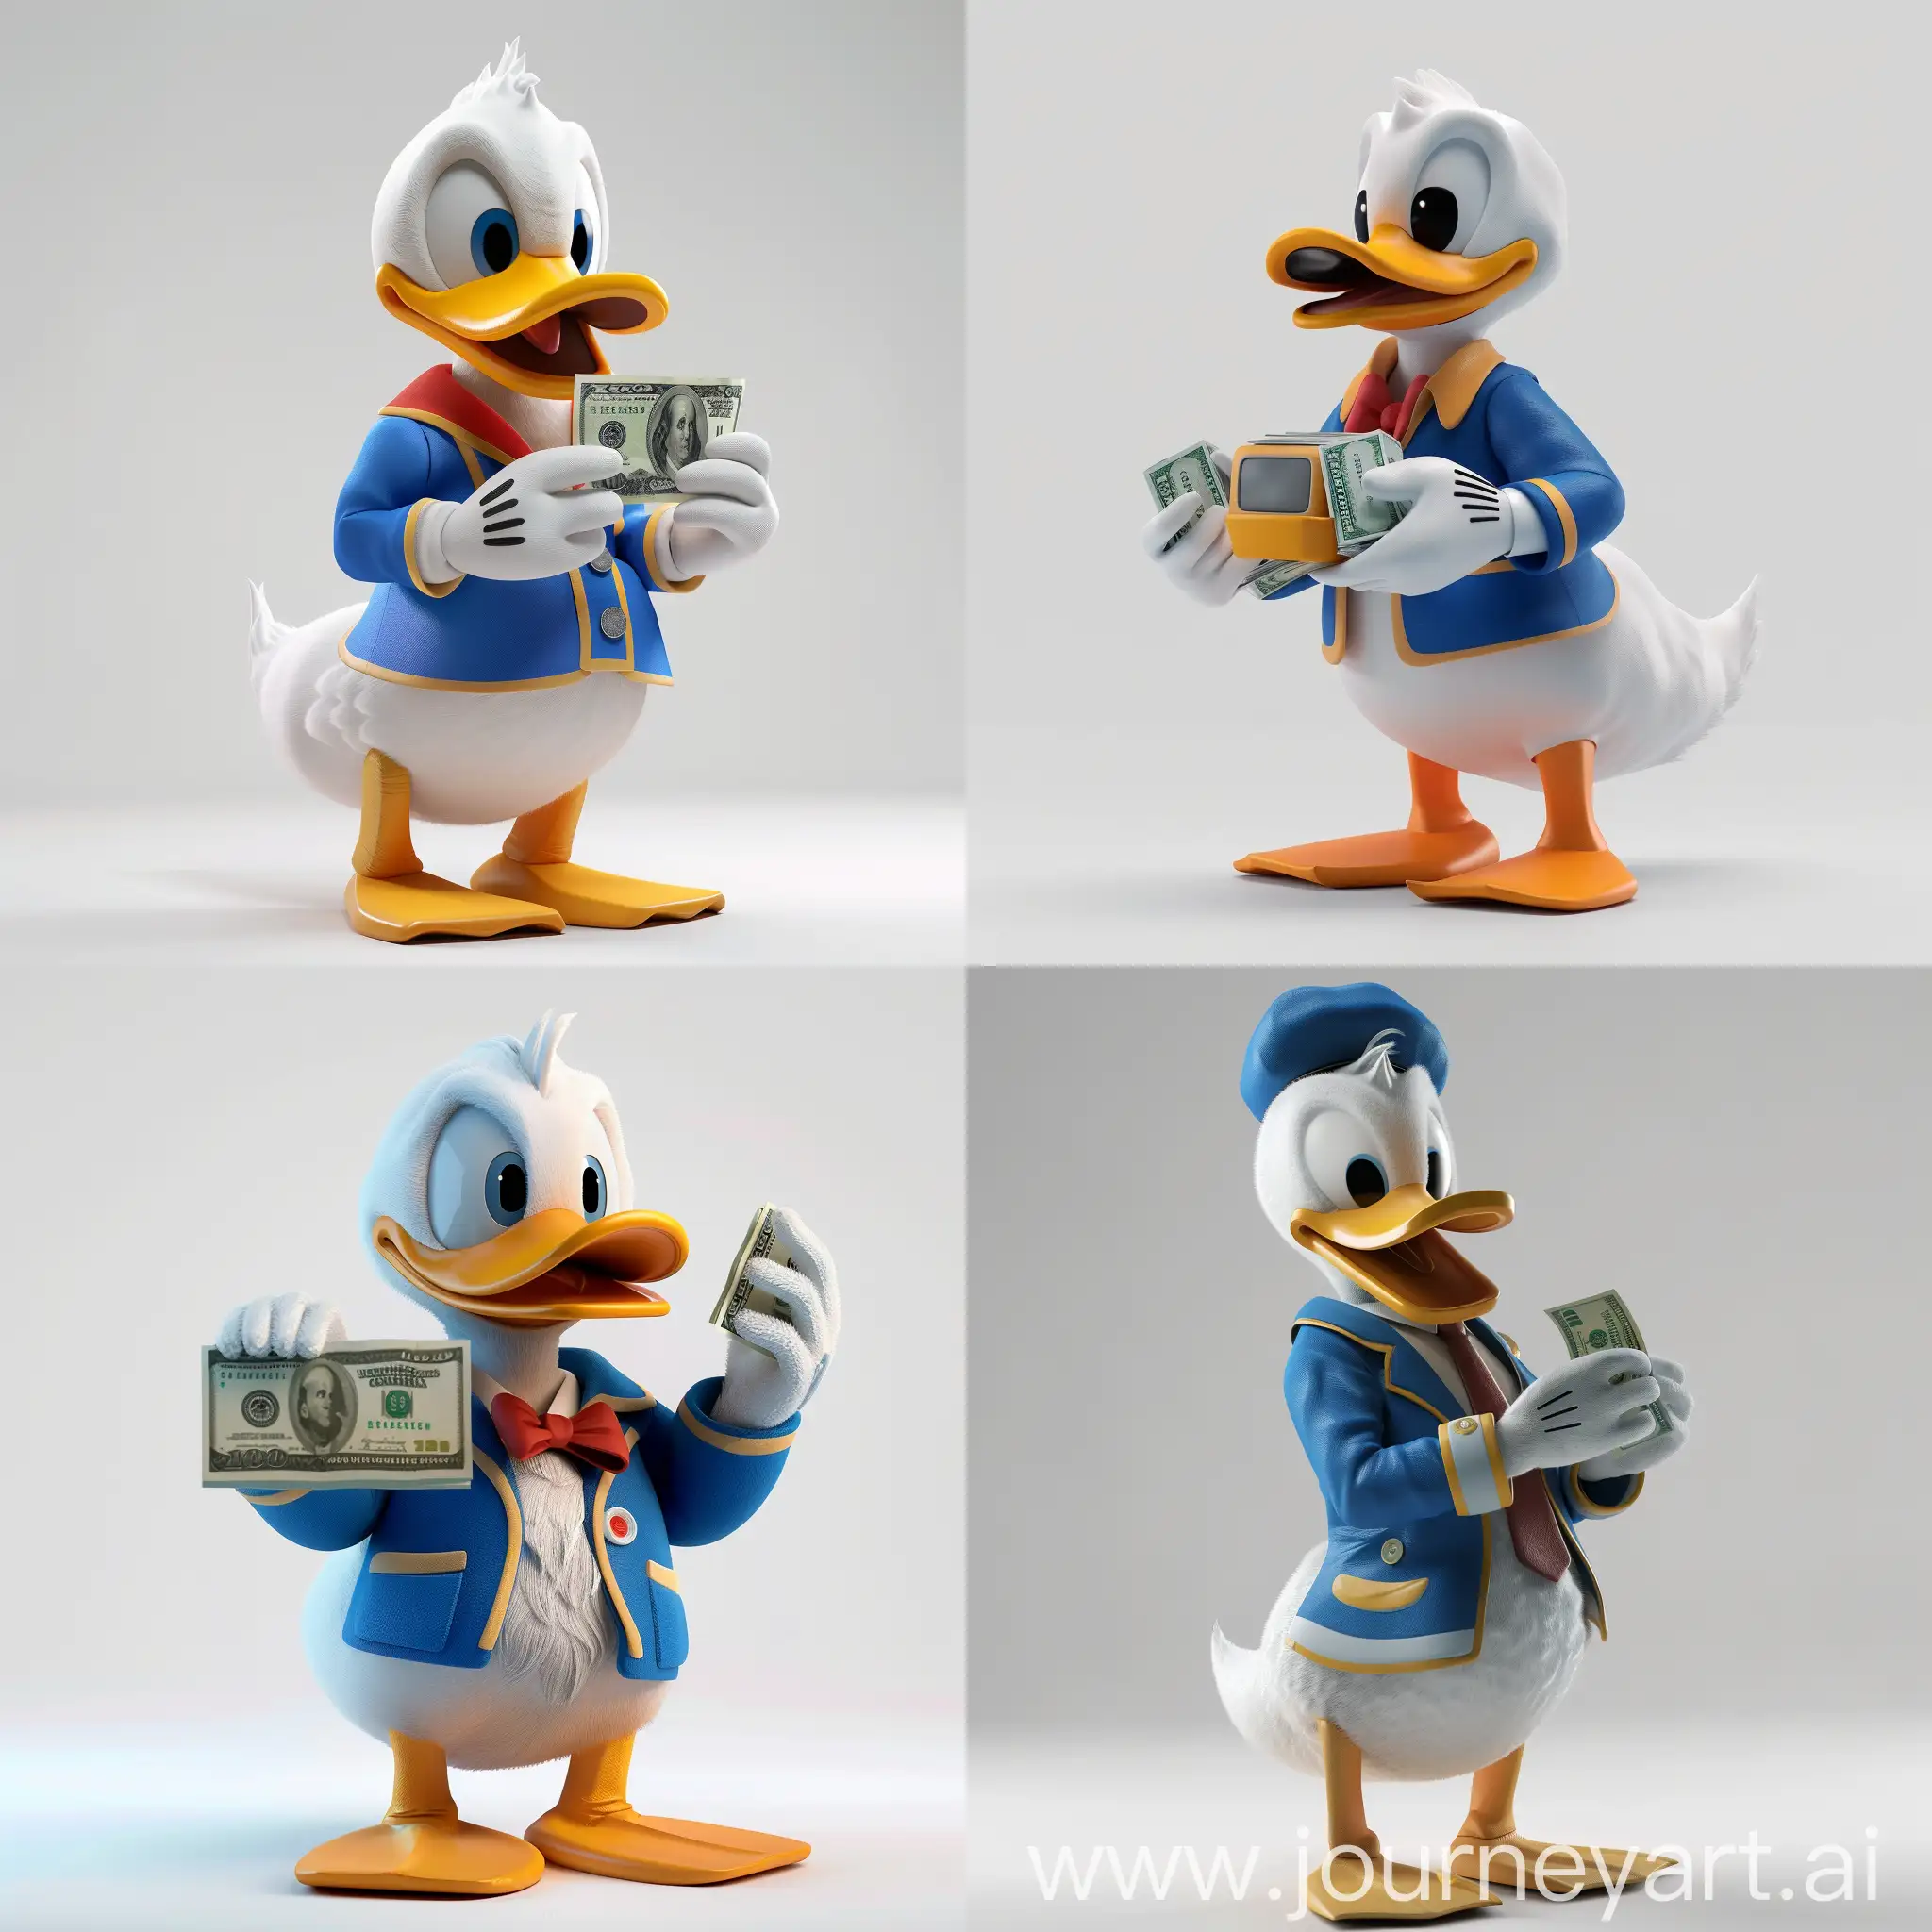 Donald-Duck-Counting-Money-Realistic-3D-Render-on-White-Background